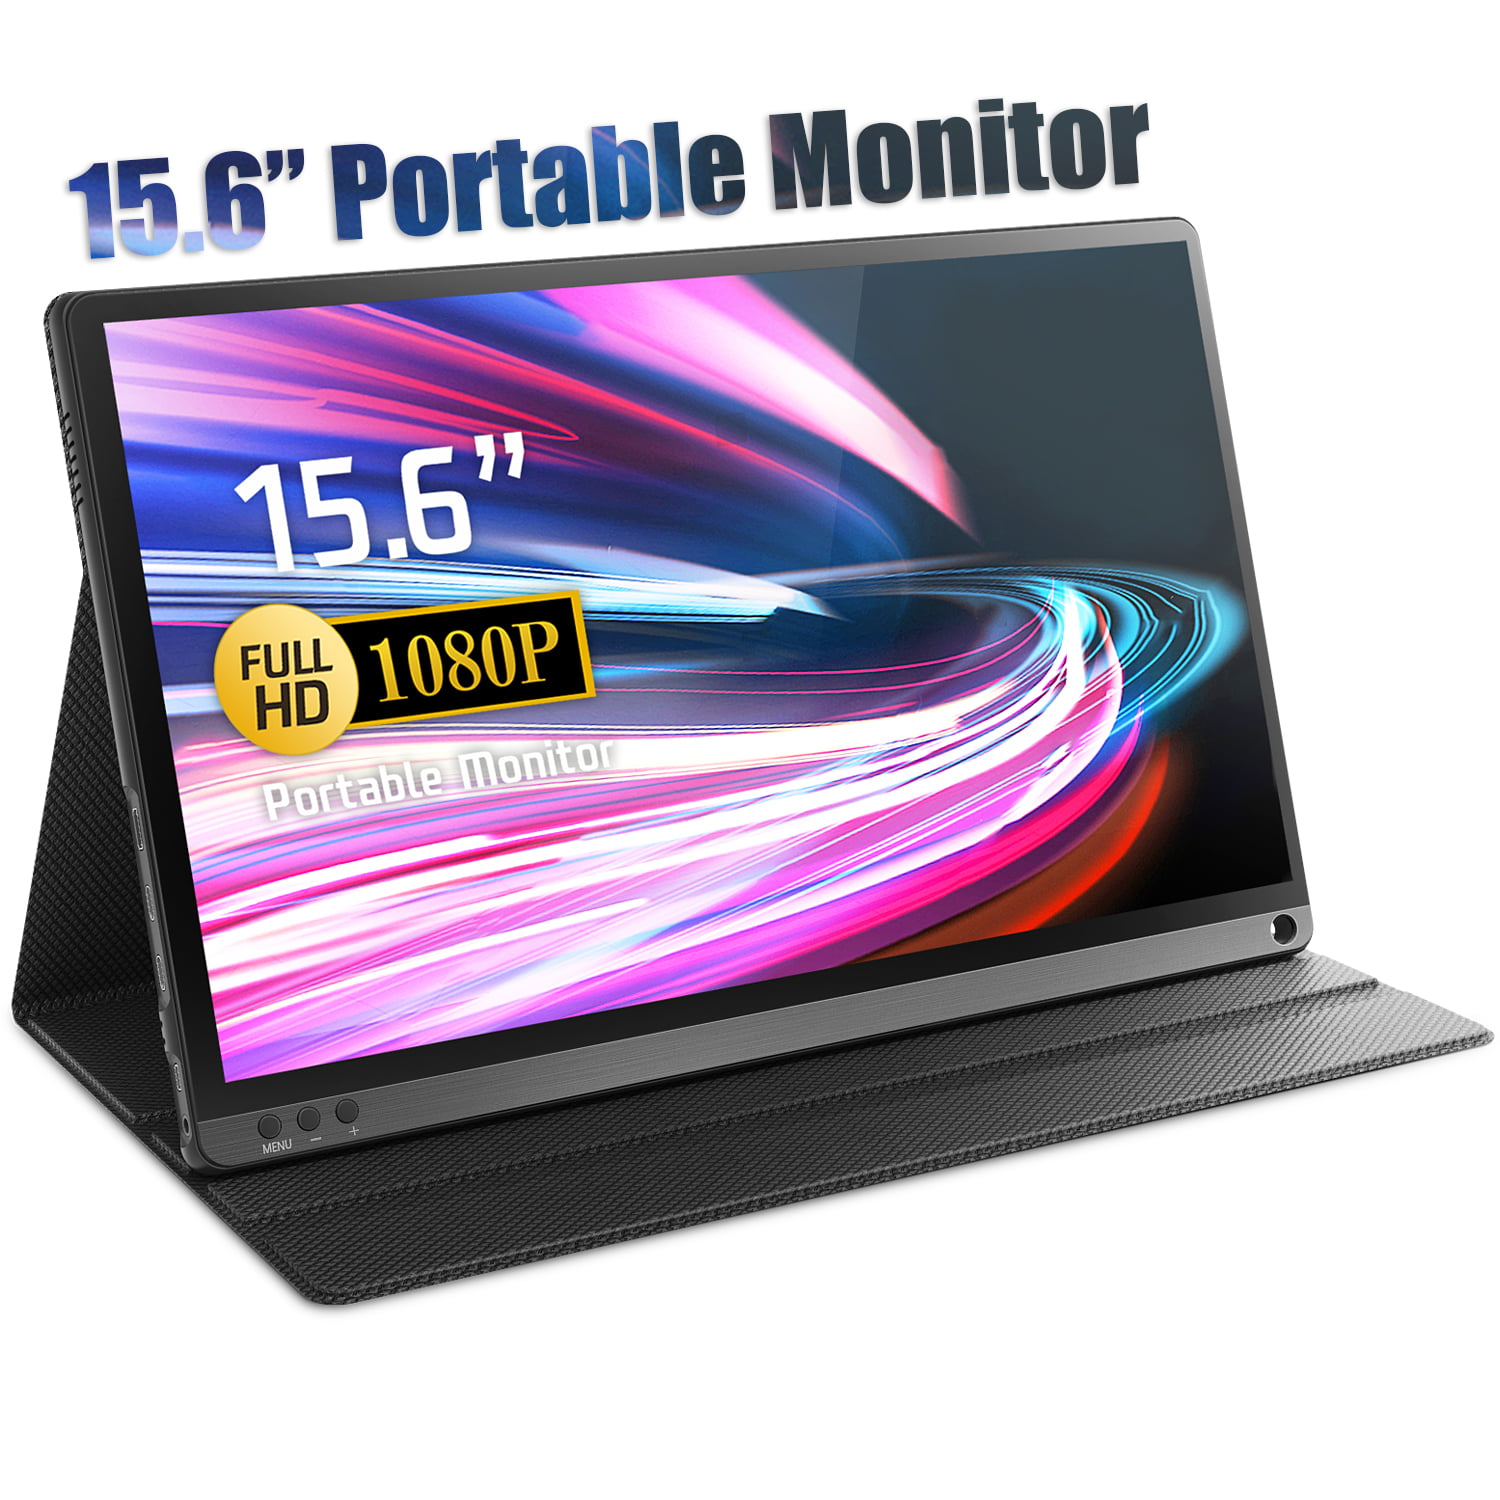 Portable Monitor, Corprit 15.6 Inch FHD 1080P USB C Portable Computer  Display IPS Eye Care Screen with HDMI Type C